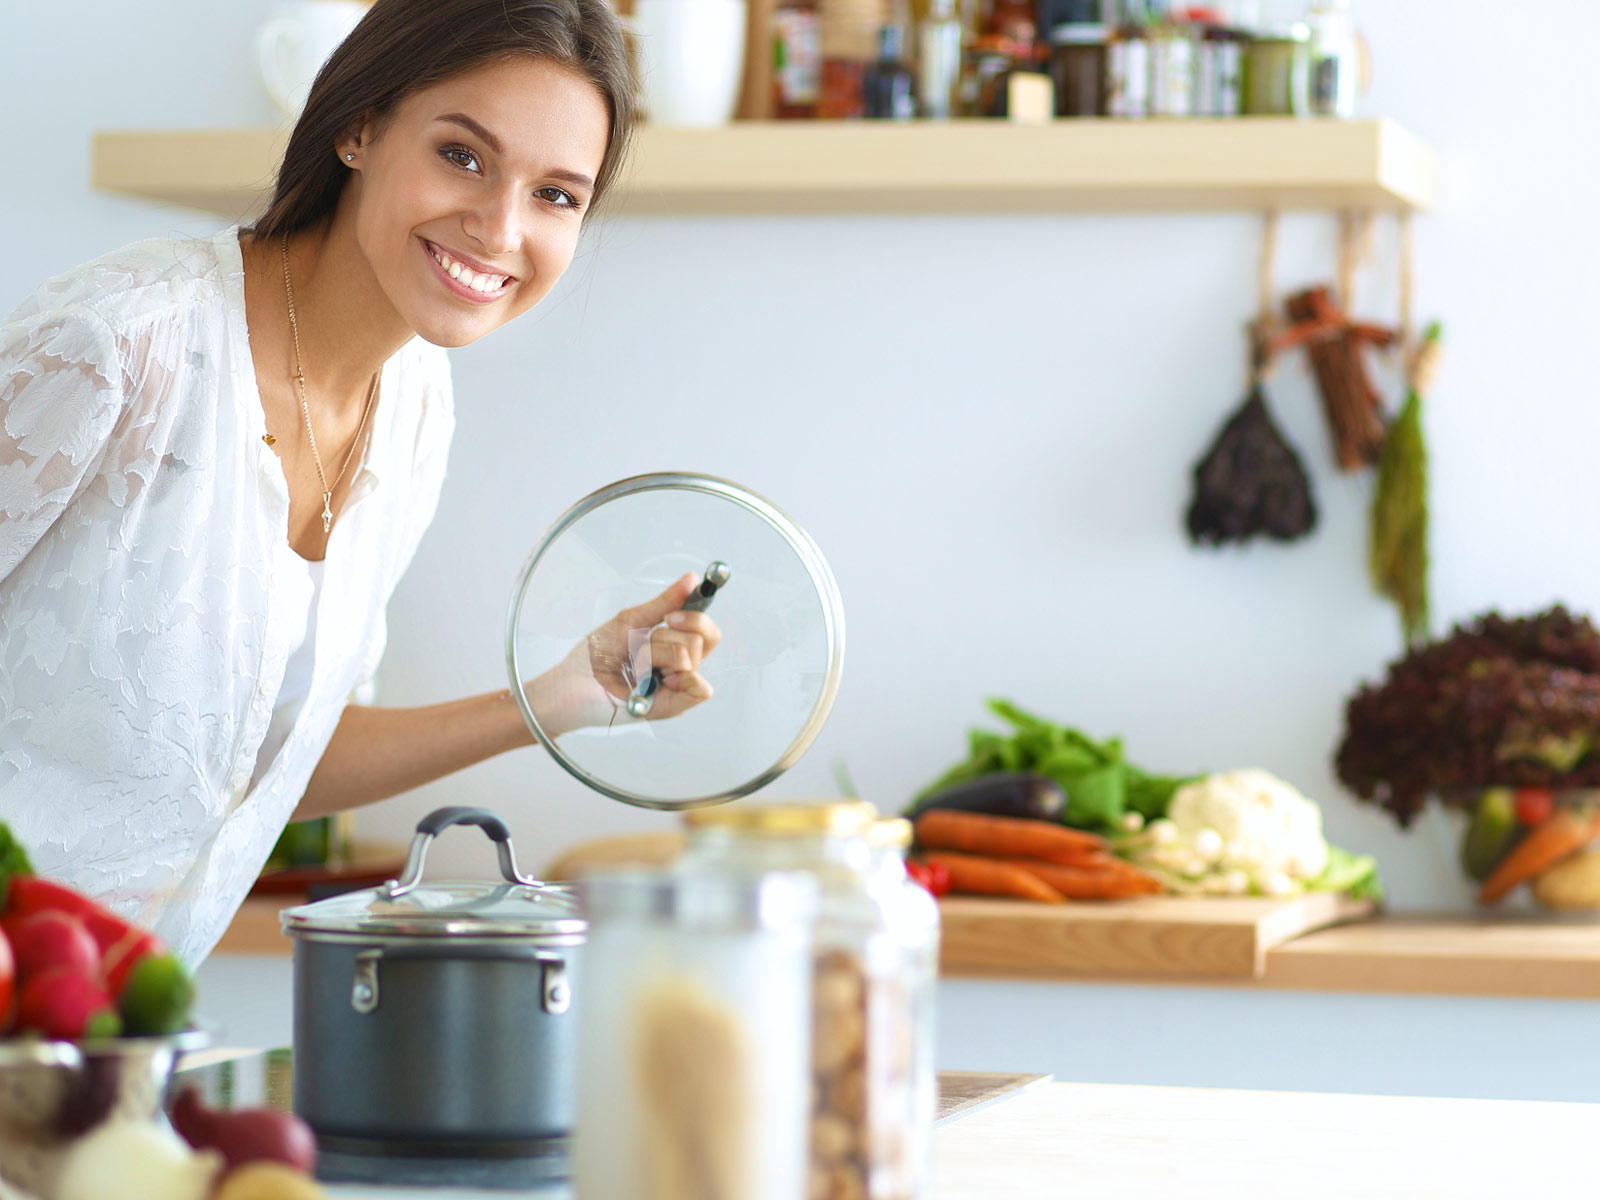 Using Appliances to Start Eating Healthier